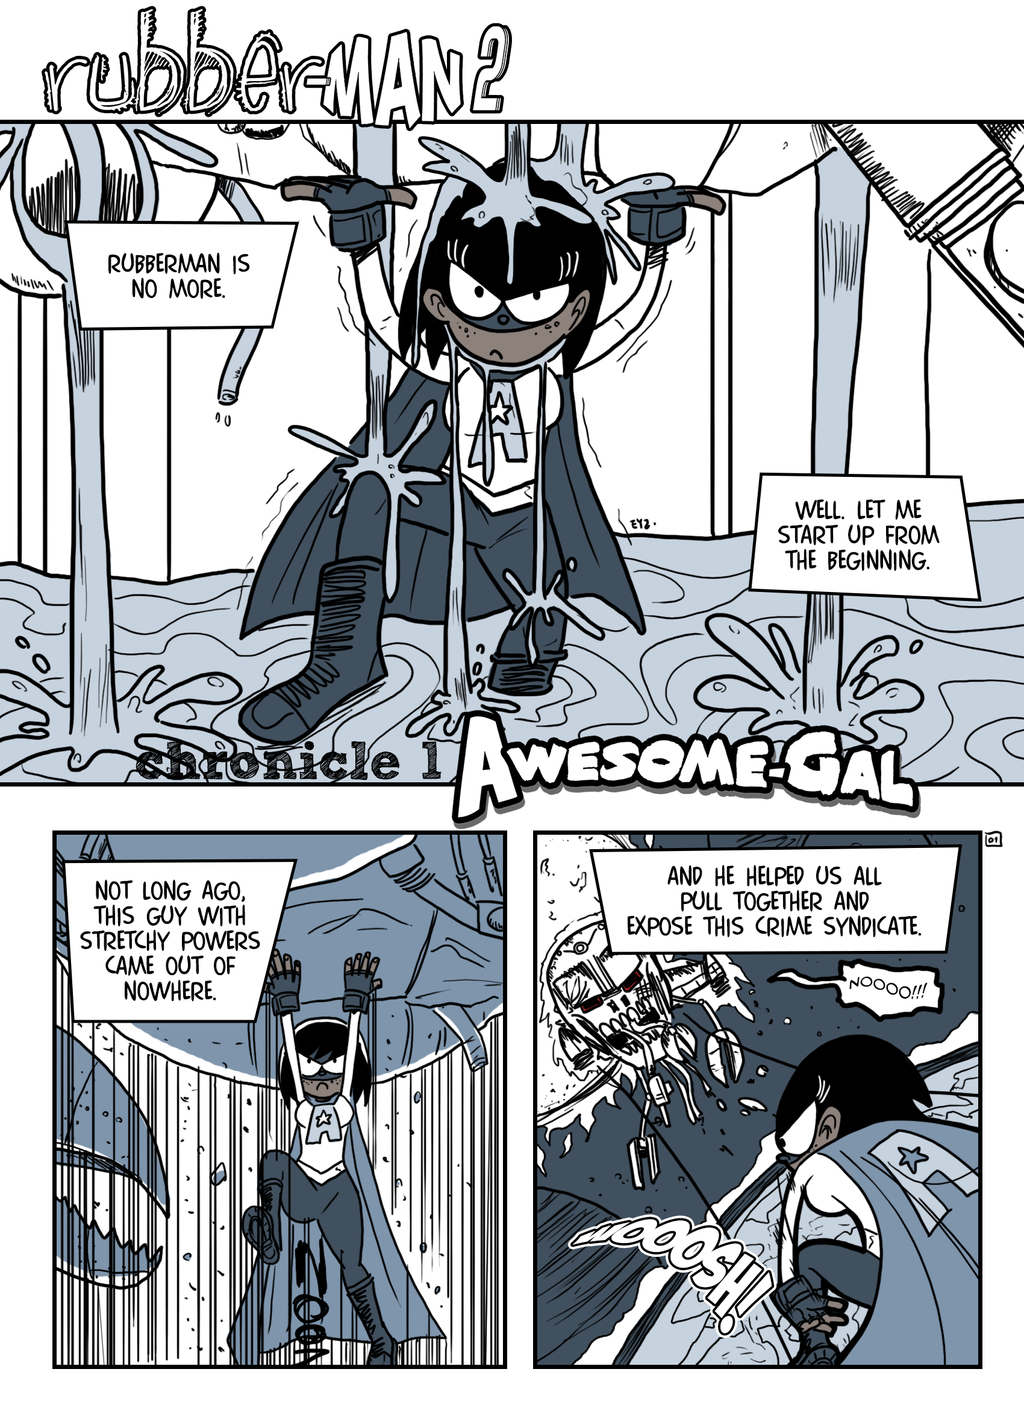 COMIX RubberMan Page 01 by theEyZmaster on DeviantArt